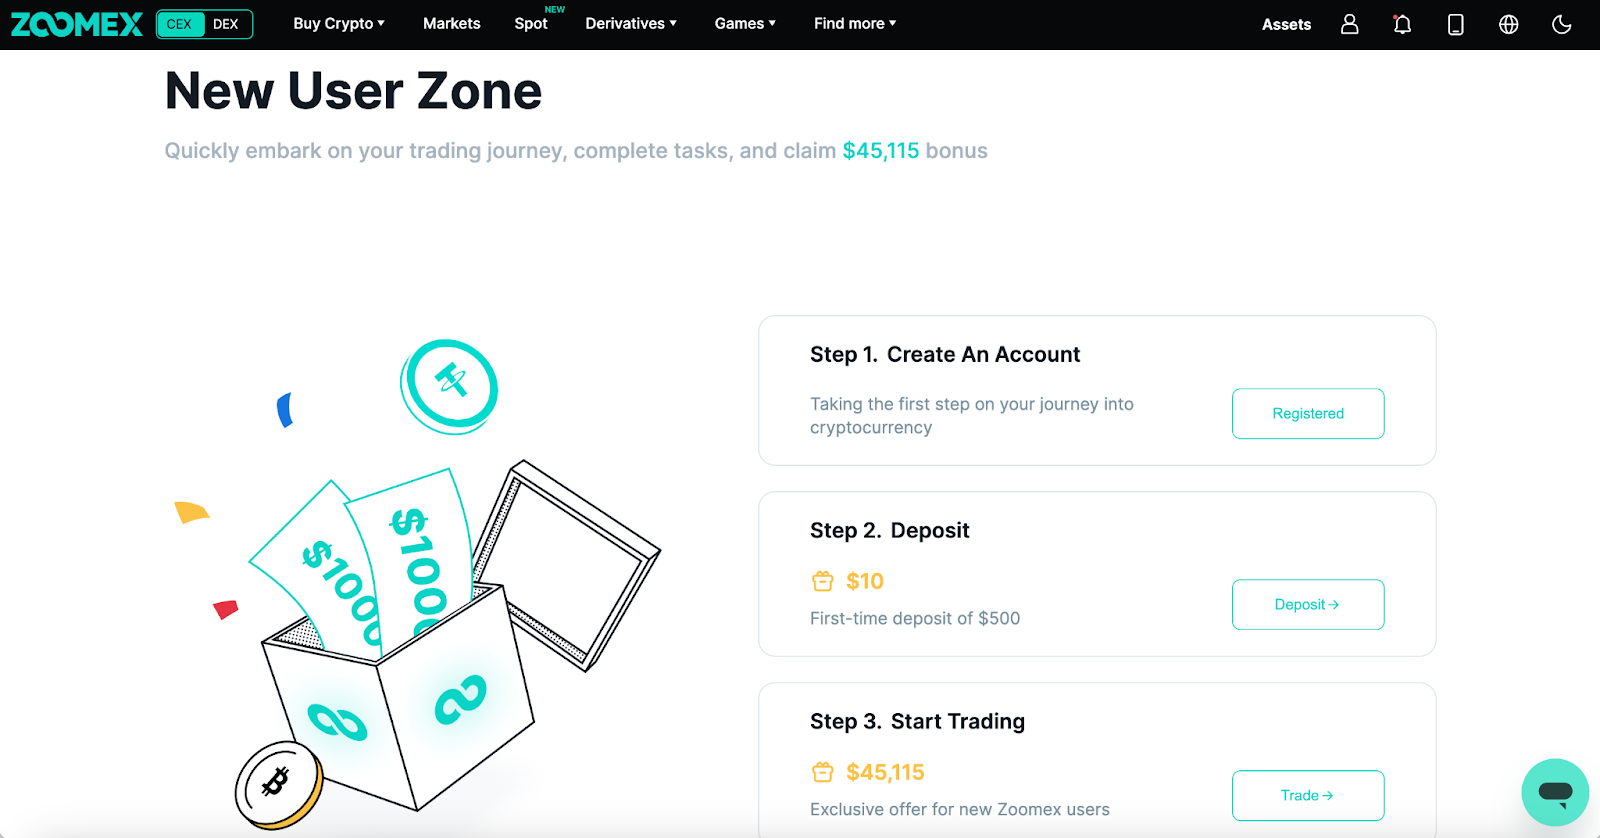 Zoomex: The One-Stop Destination for Crypto Trading